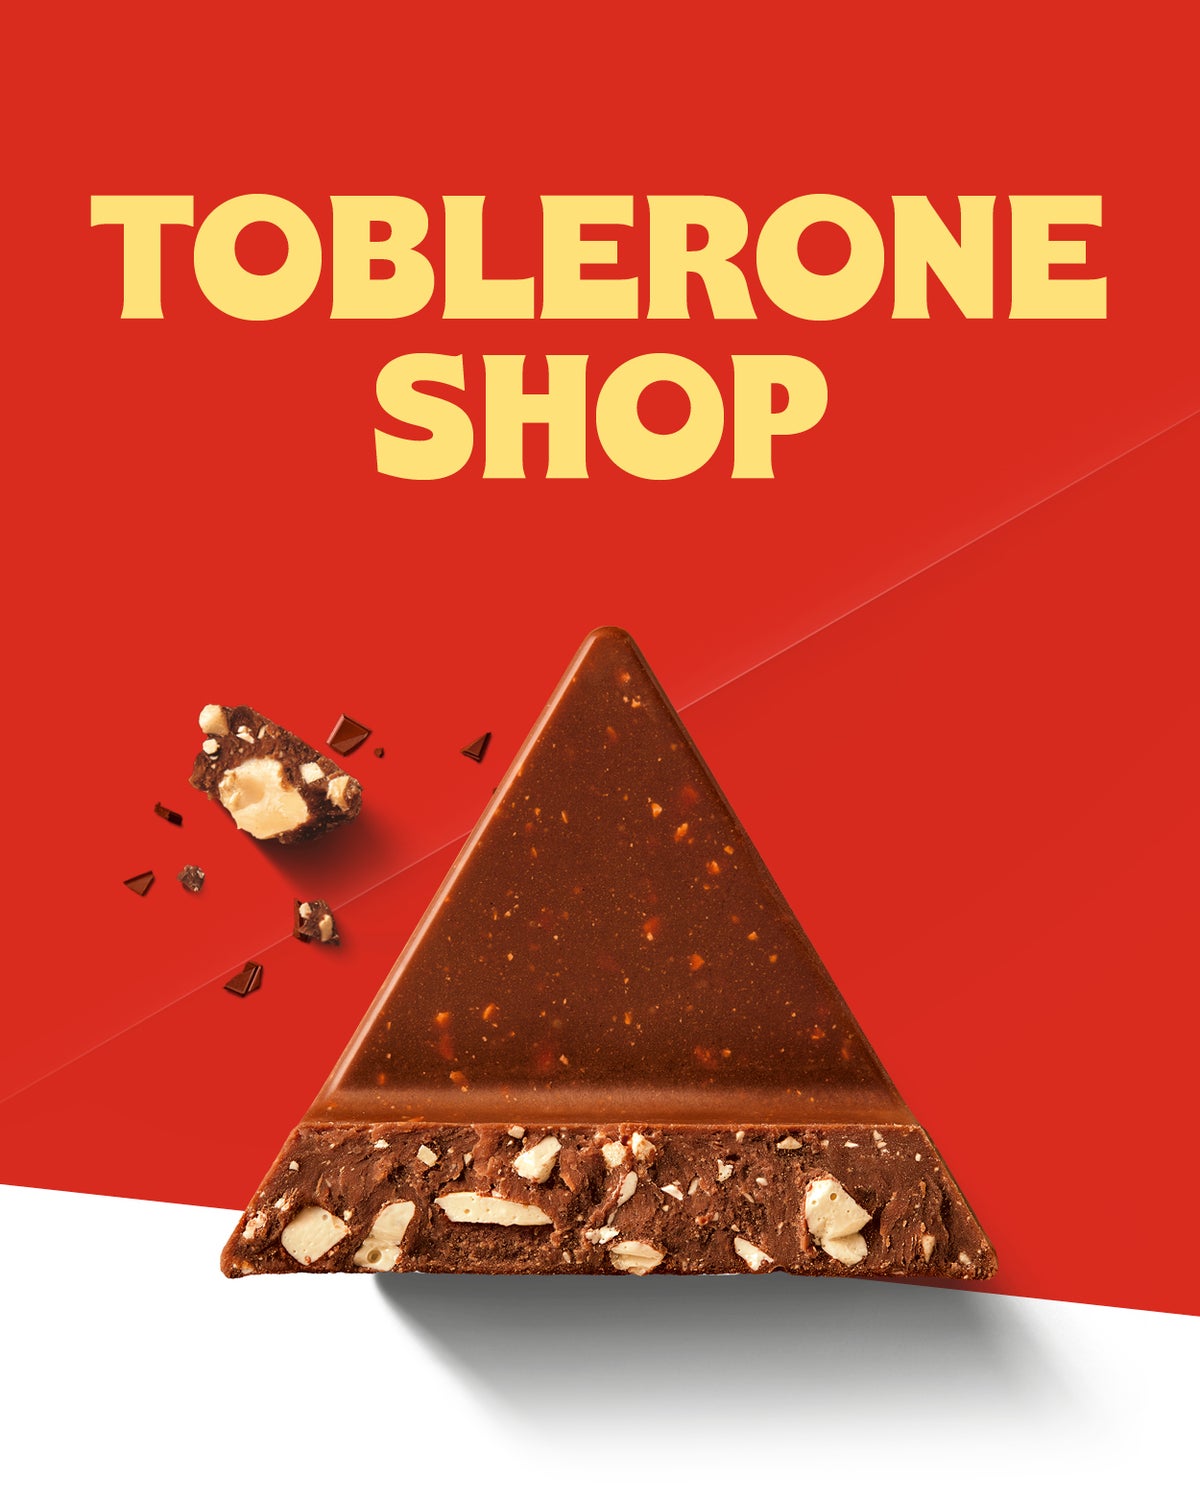 Toblerone shop with picture of a triangle of toblorone on a red background.